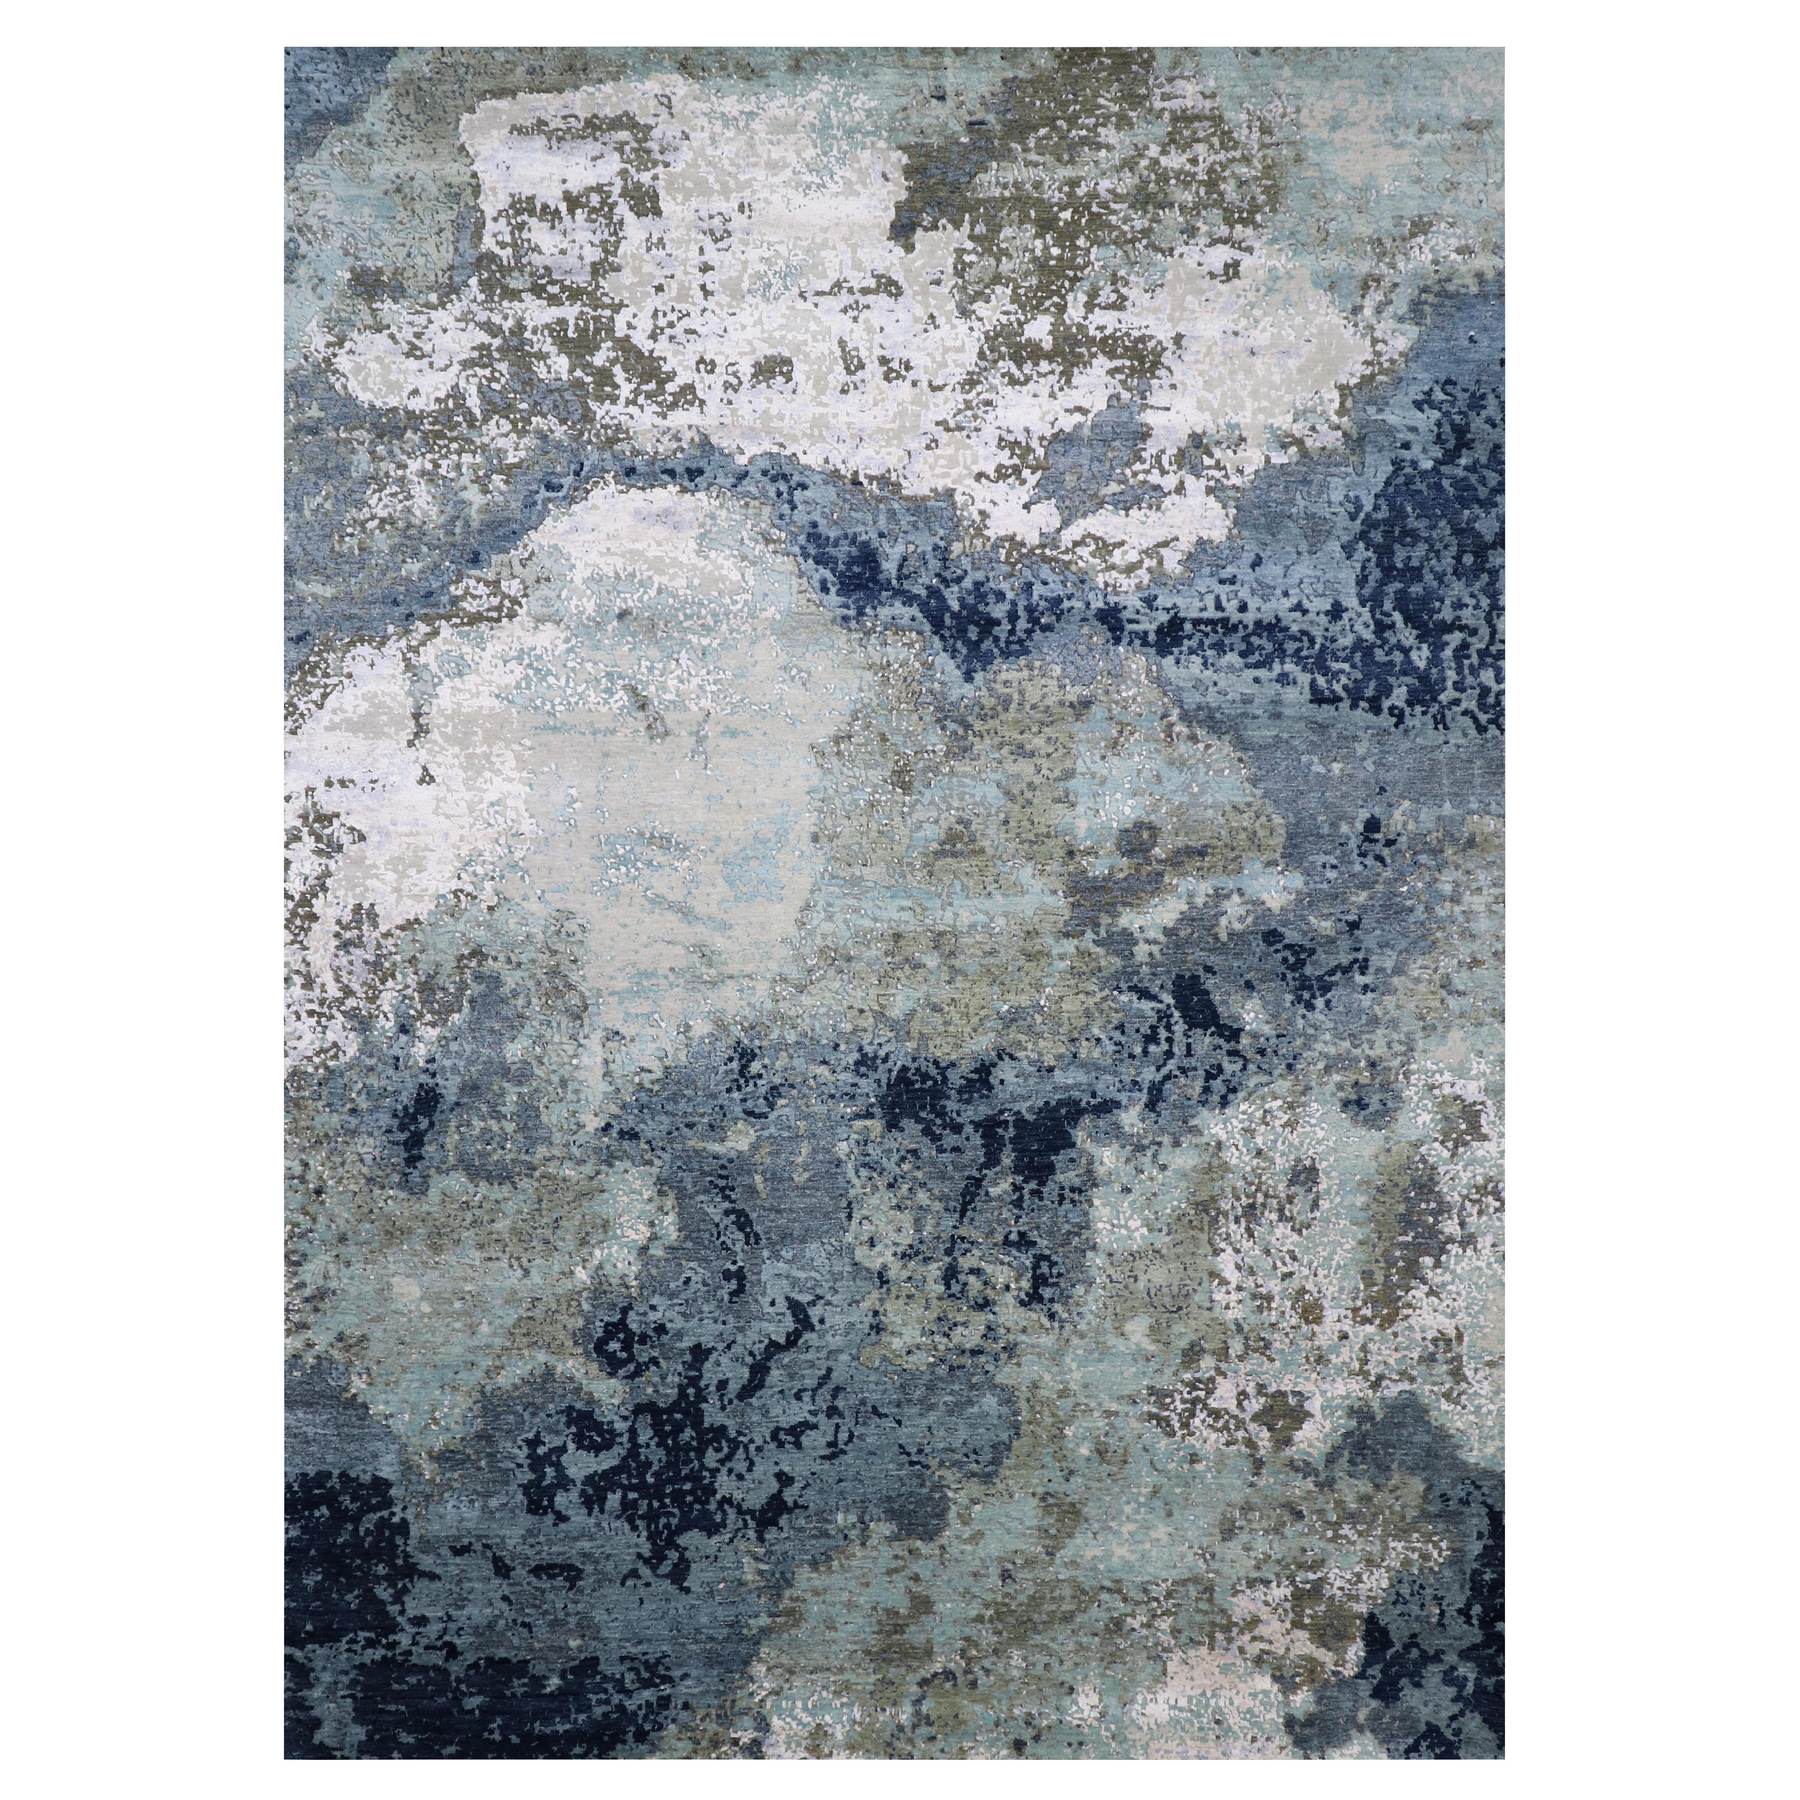  Wool Hand-Knotted Area Rug 10'1